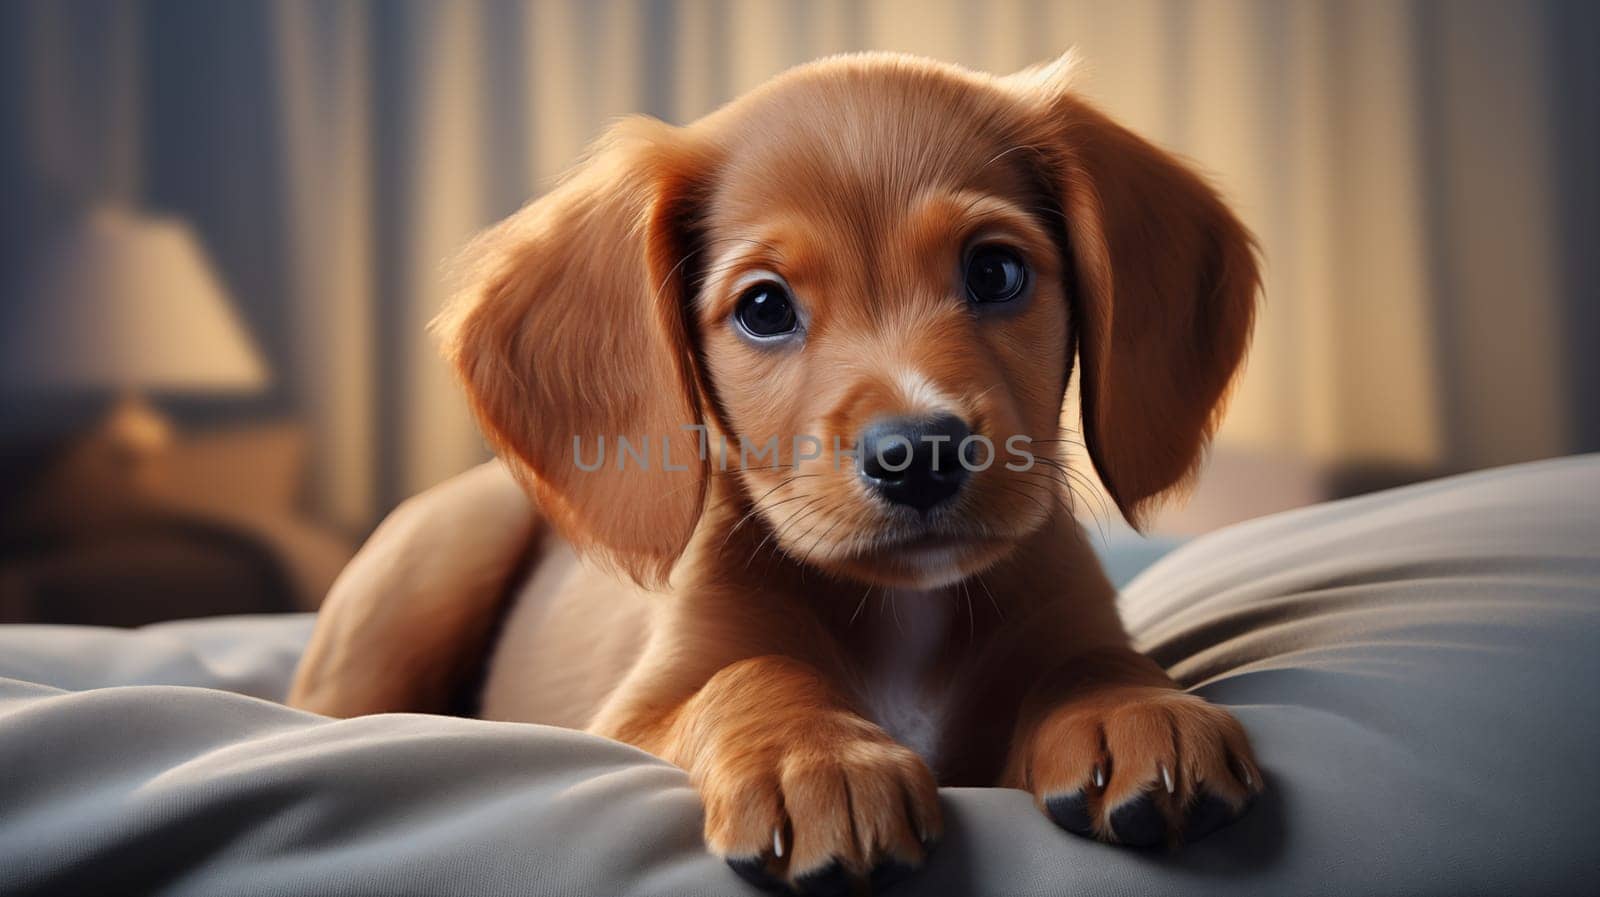 Cute ginger dachshund puppy lying on a cozy blanket, at bedroom, warm light.